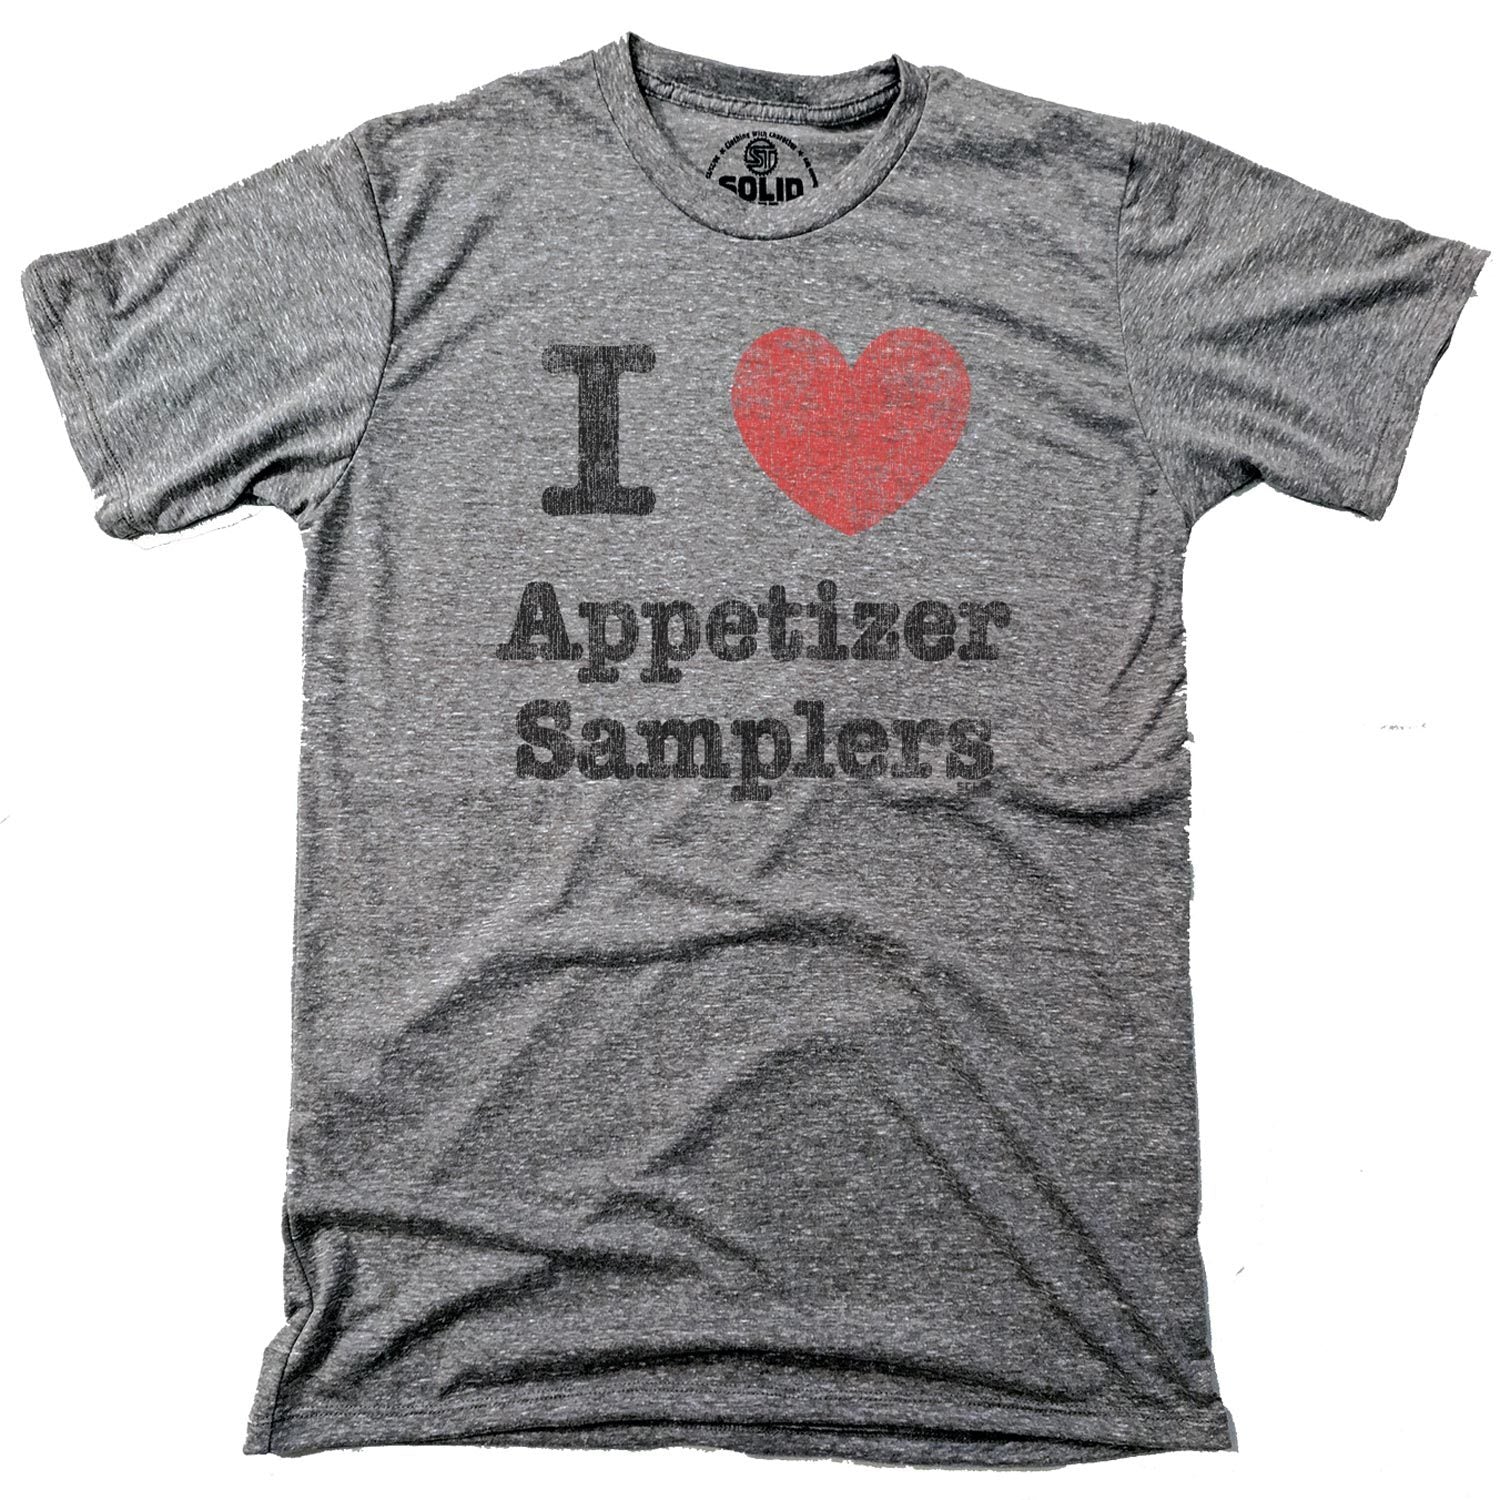 Men's I Heart Appetizer Samplers Vintage Graphic T-Shirt | Funny Foodie Tee | Solid Threads